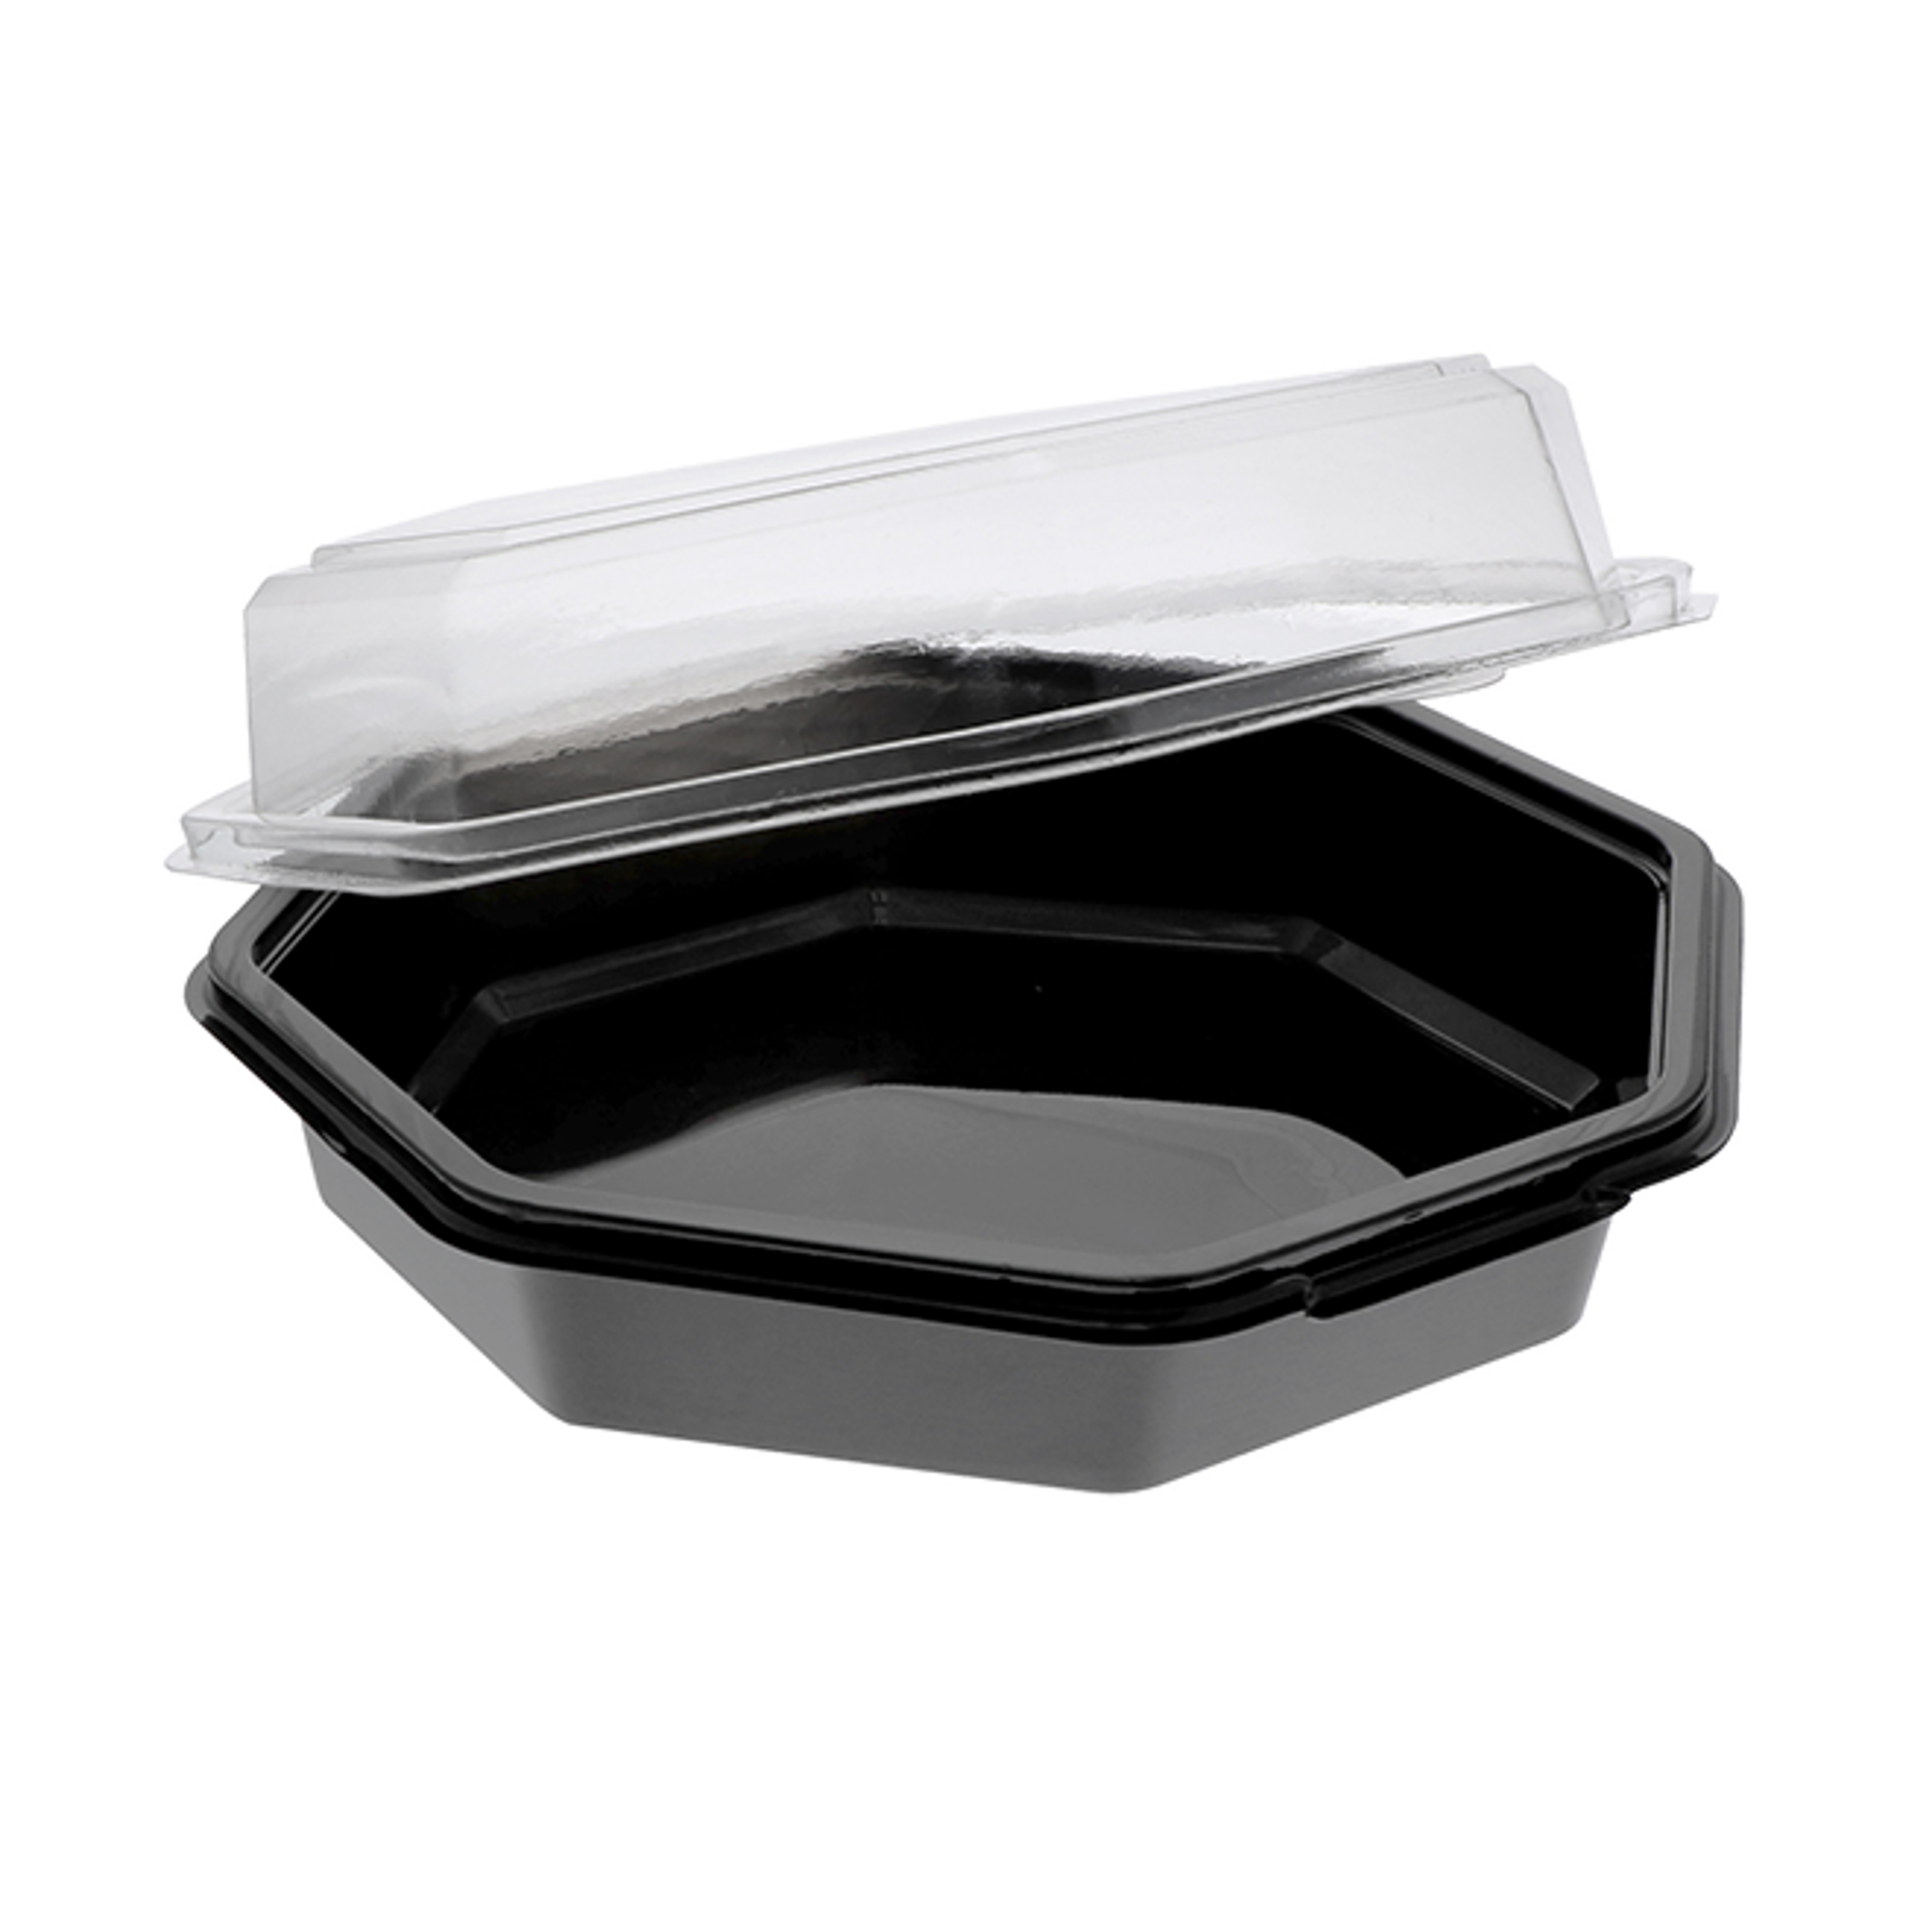 24 oz Rectangular to Go Containers with Lids Black 150 Set